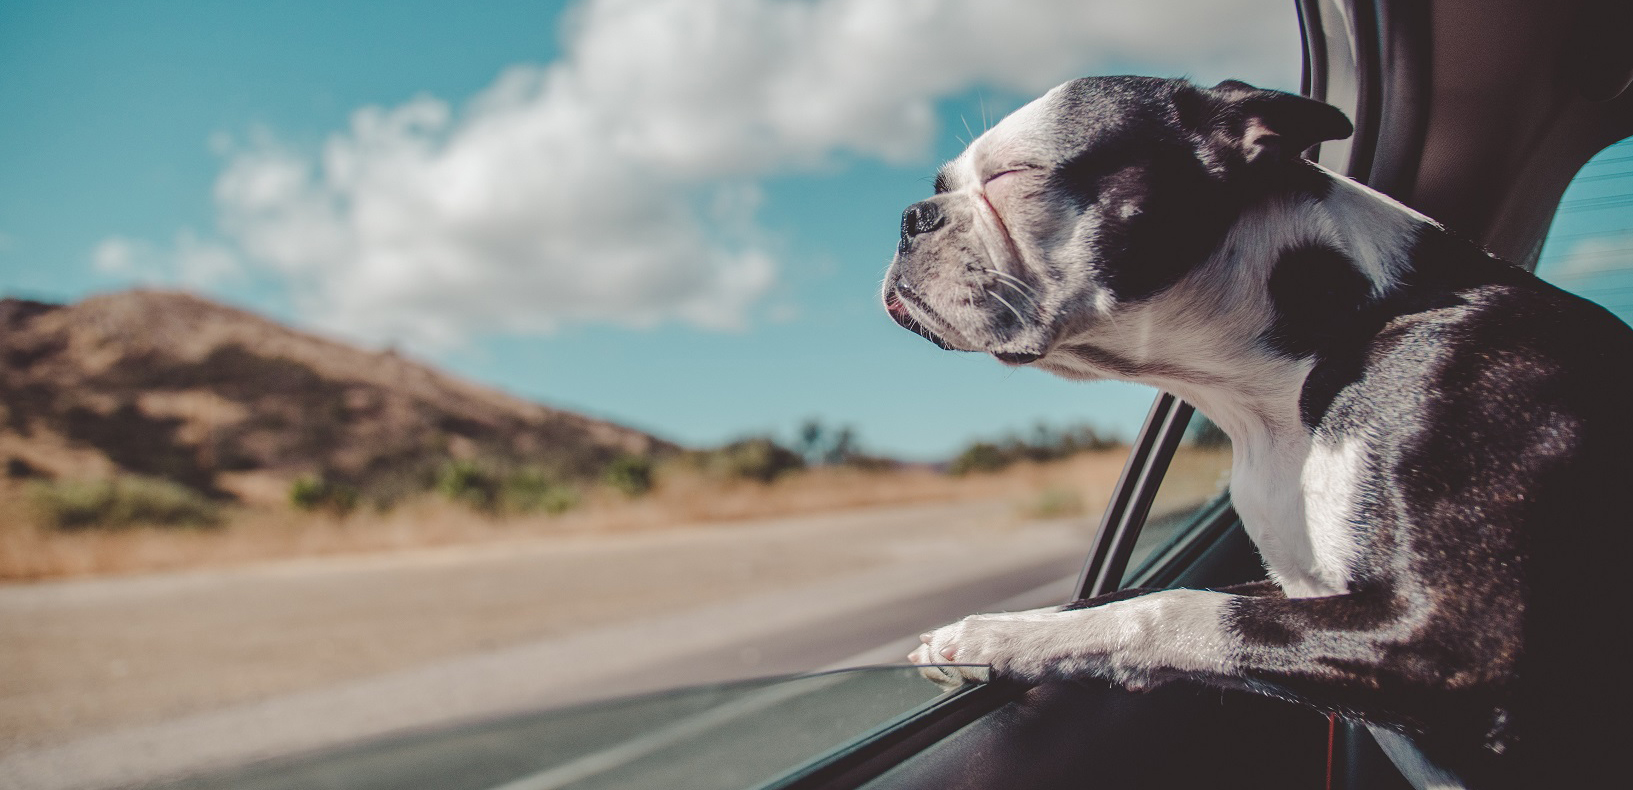 A black and white dog sticks its head out of the car window during a drive through the mountains